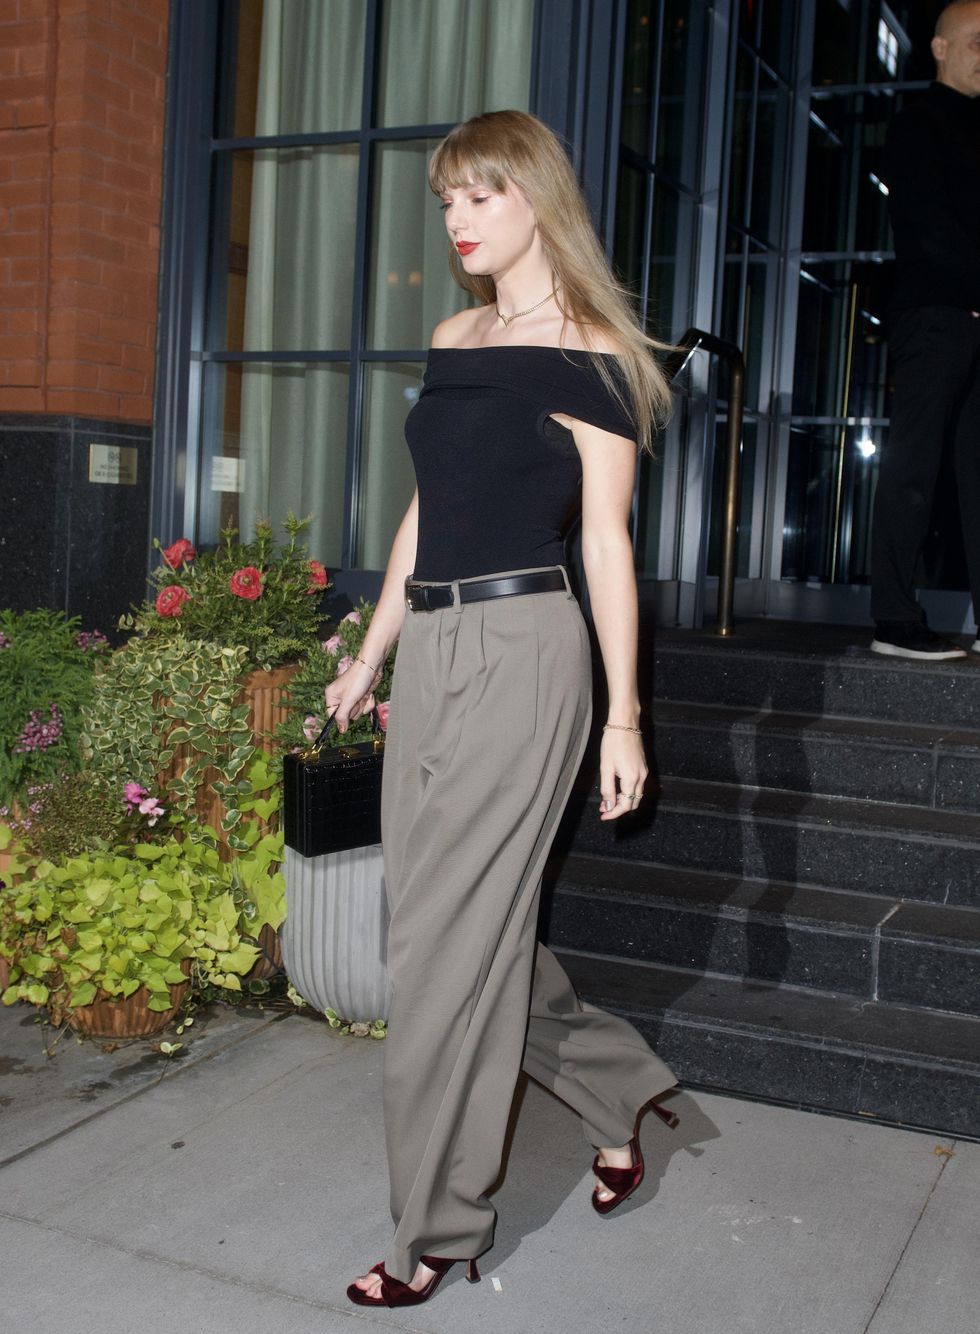 New York, New York, September 21. Taylor Swift is seen leaving the Barrière Fouquets Hotel on September 21, 2023 in New York. New York photo by Megagc Images